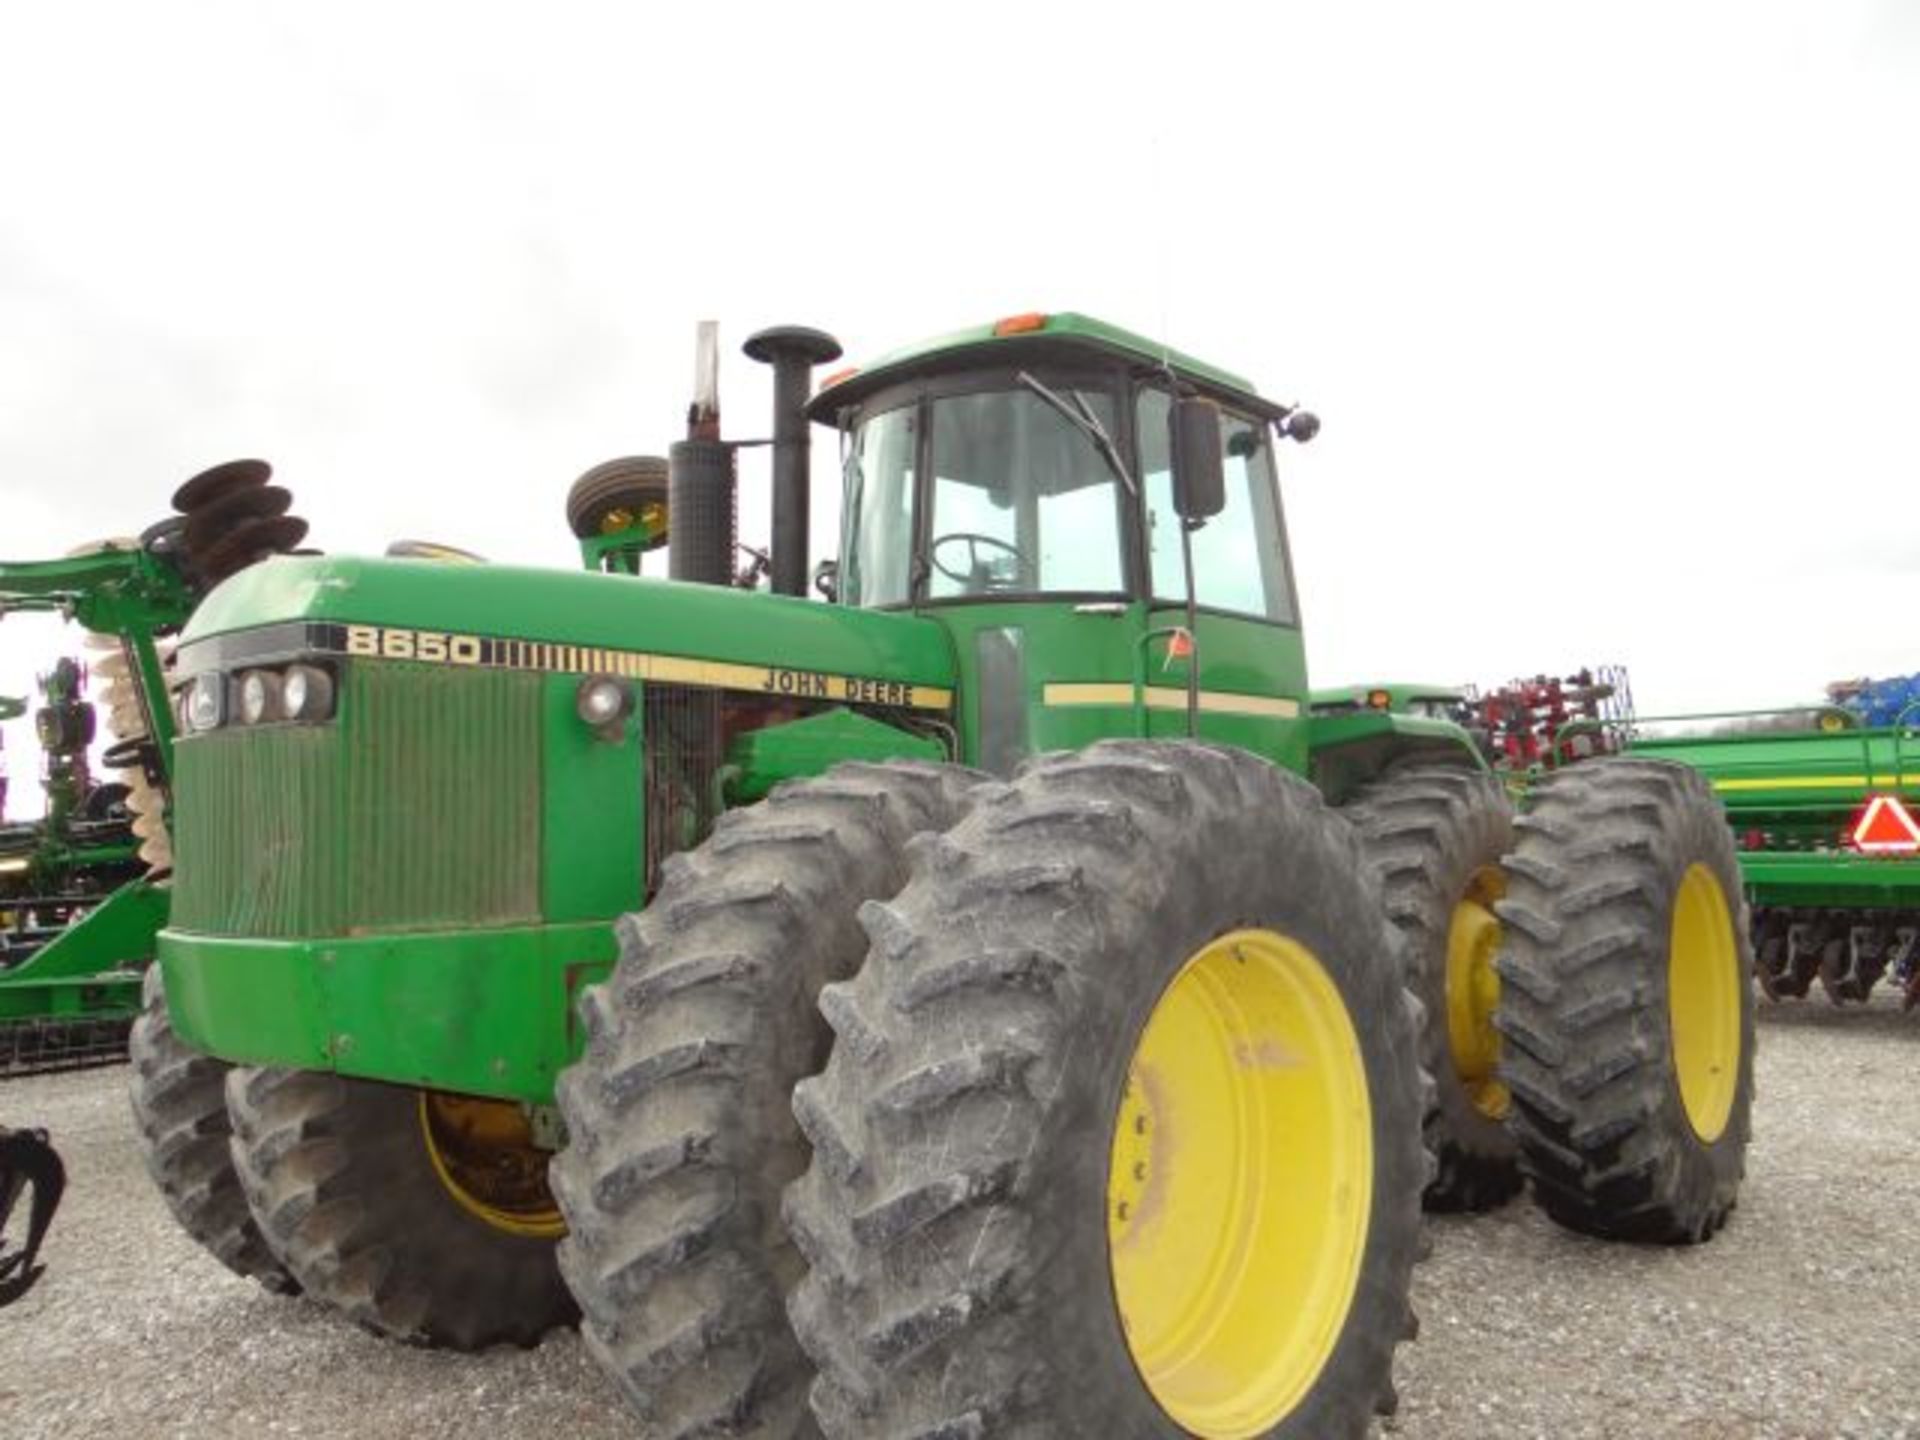 JD 8650 Tractor, 1982 #157562, 4wd, 3pt, Quick Hitch, Rear Pto, 4 Rear Scv, 20.8R-38 Tires Insides - Image 2 of 4